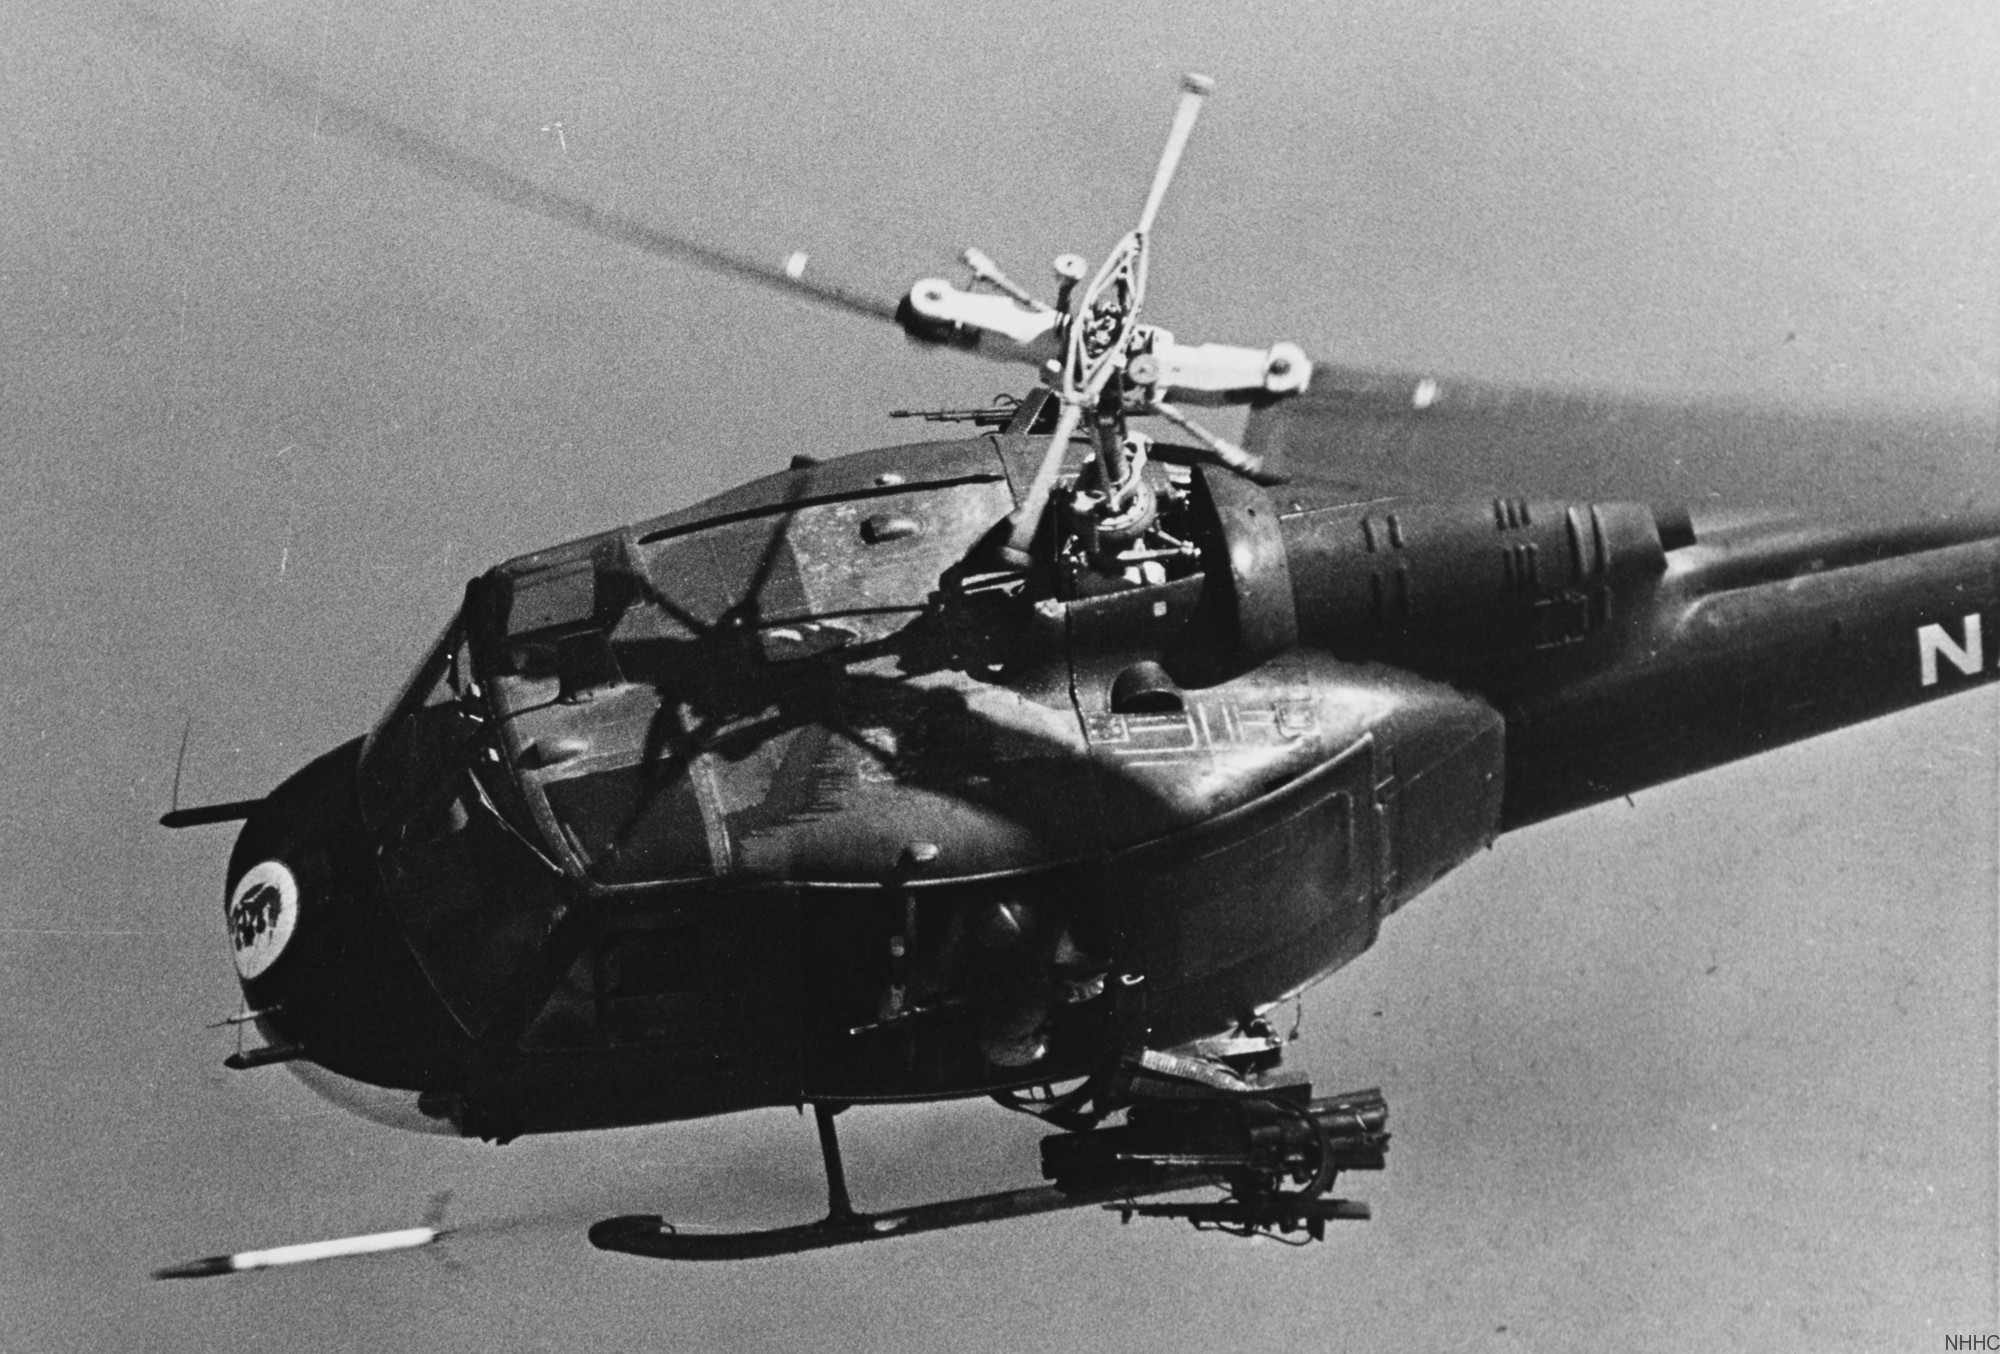 hal-3 seawolves helicopter attack squadron light us navy uh-1 huey 20 2.75 inches zuni rocket